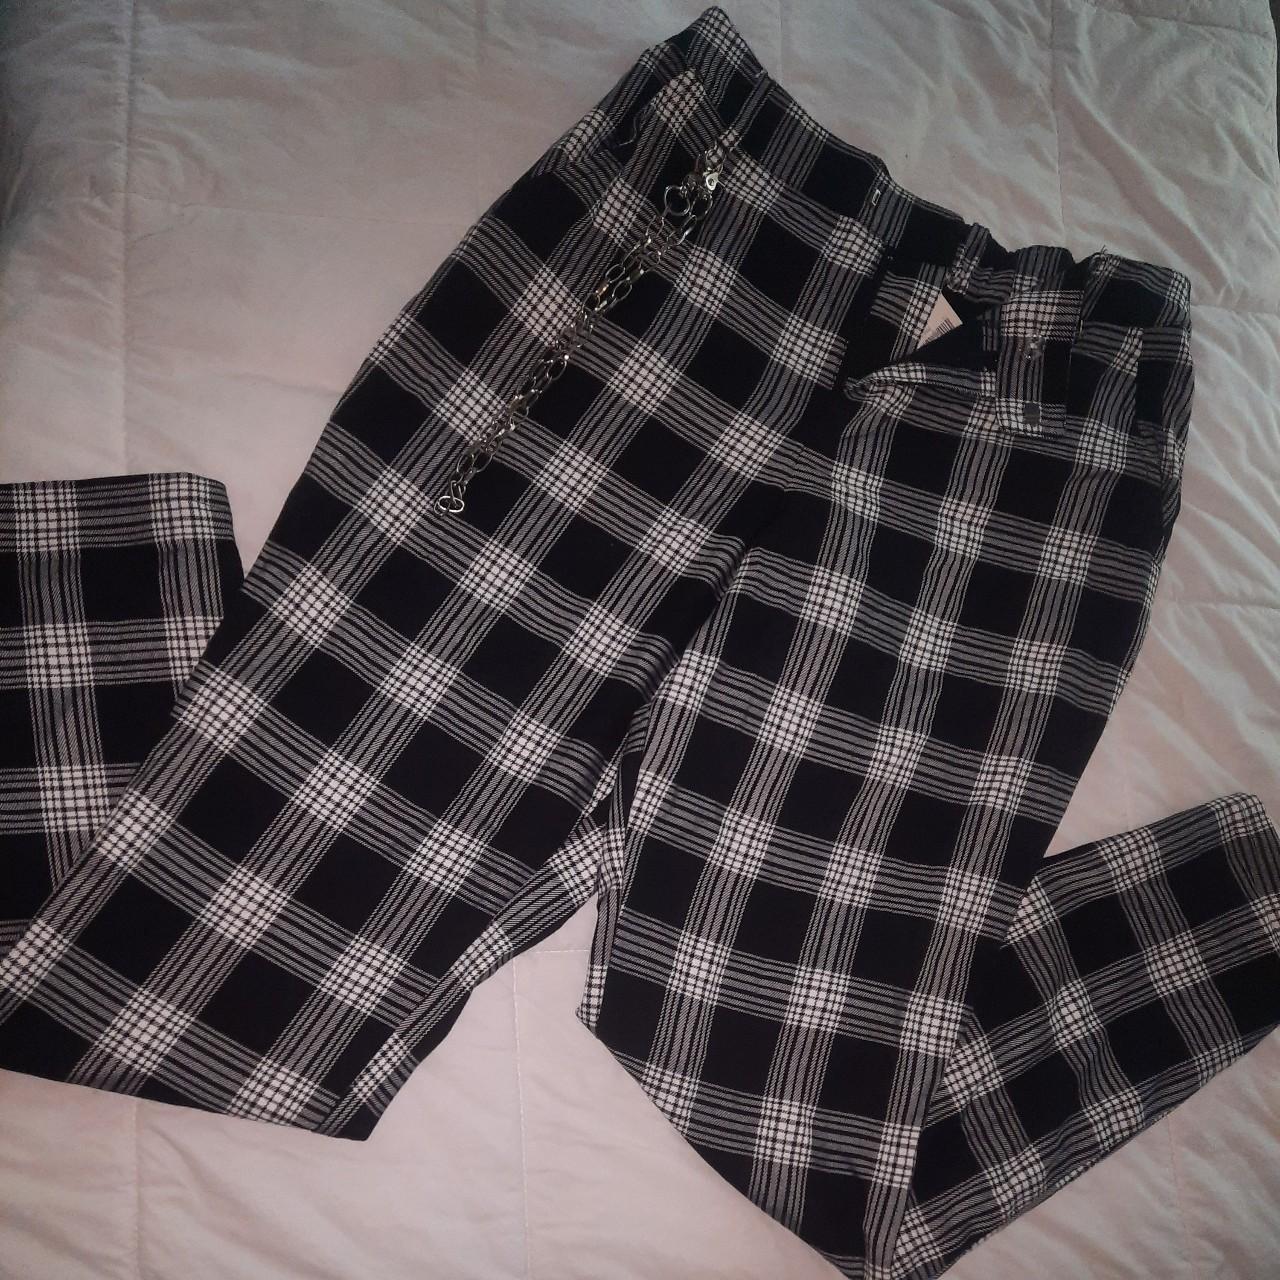 Hot Topic black and white plaid pants with chain - Depop